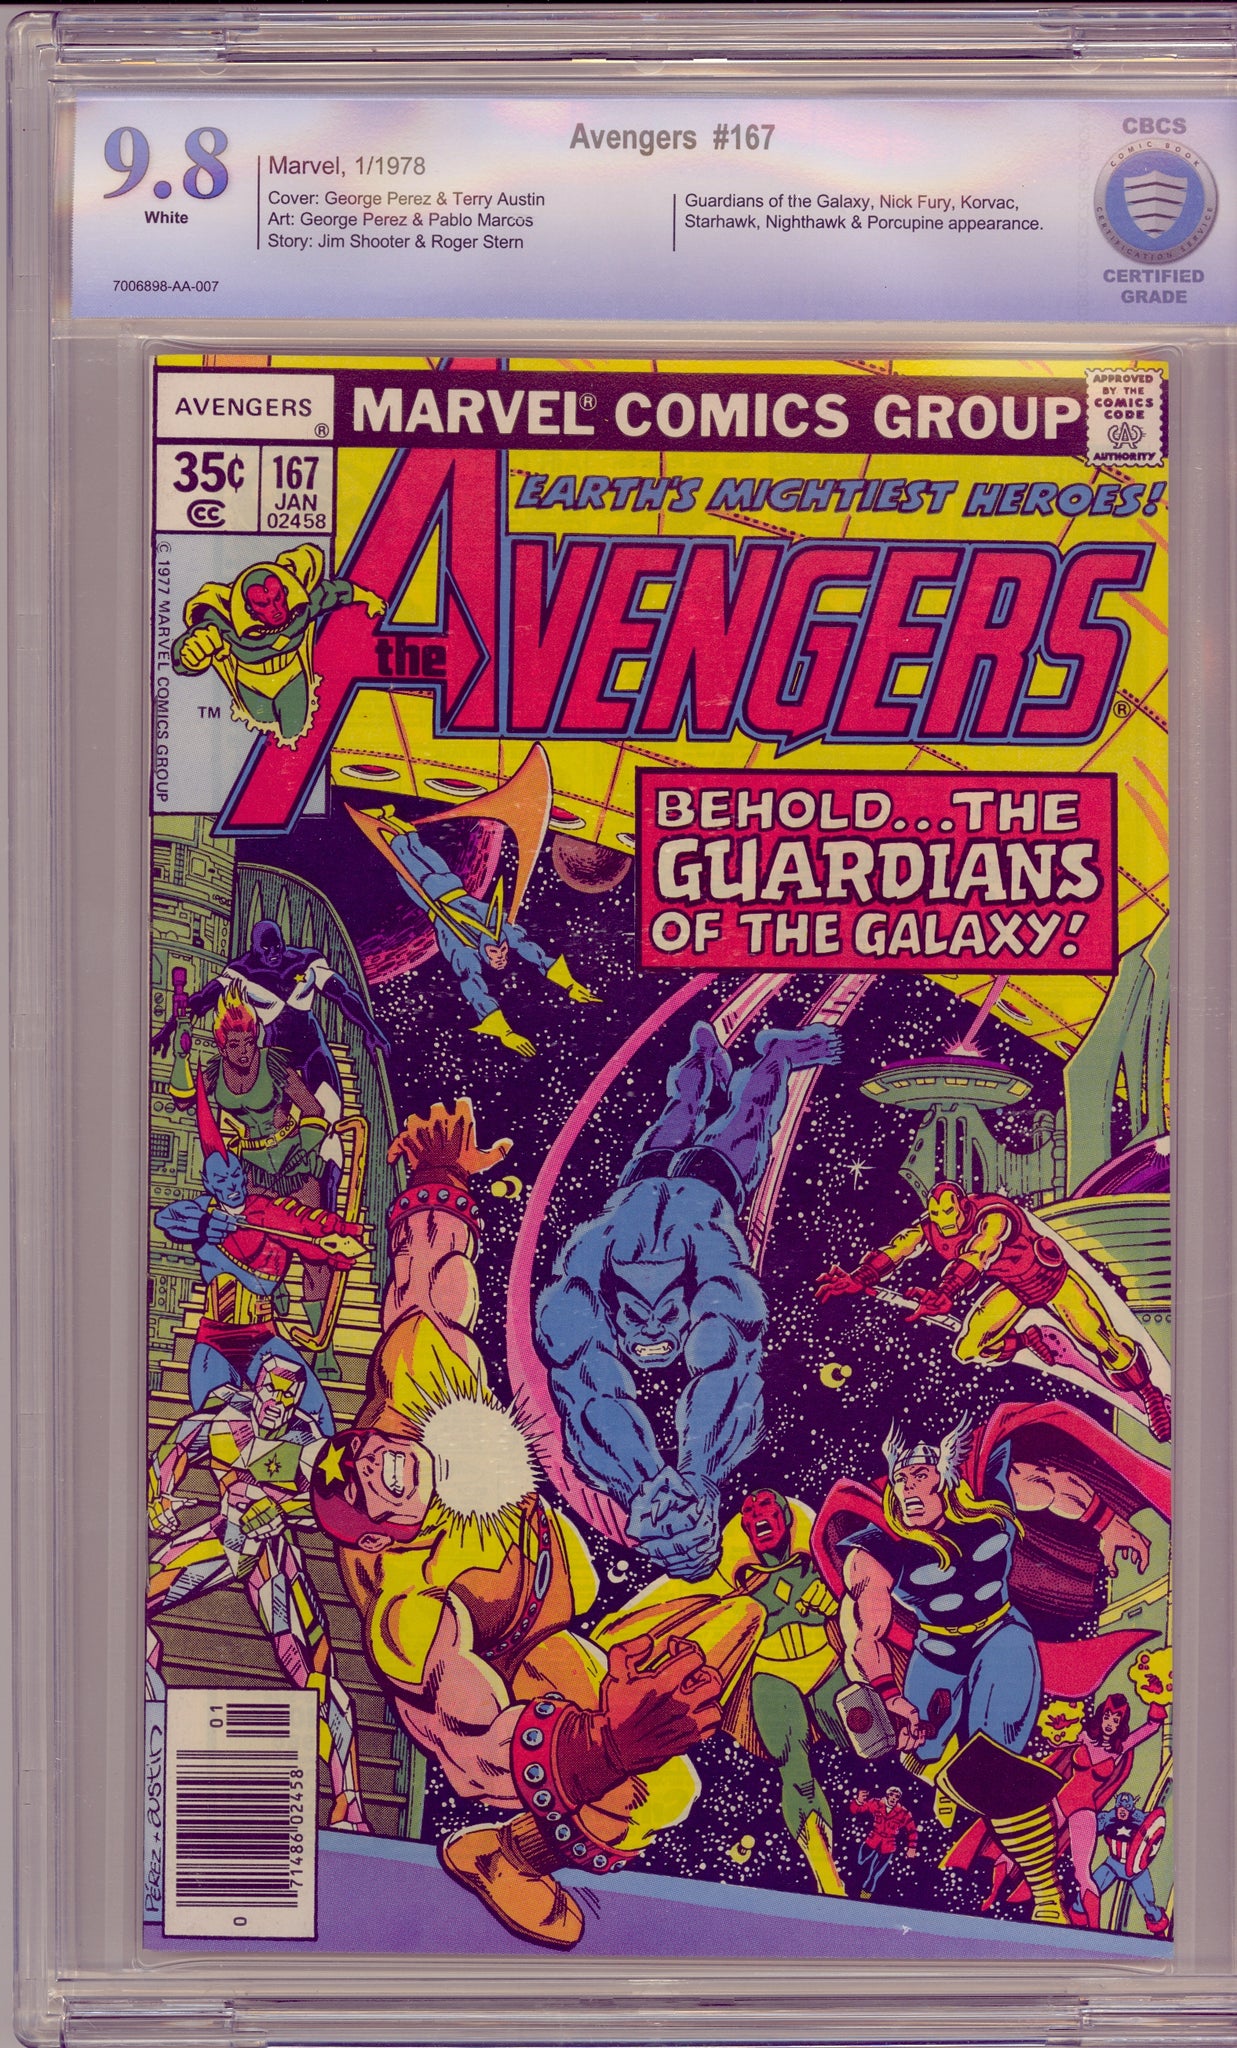 Avengers #167 (1978) Guardians of the Galaxy